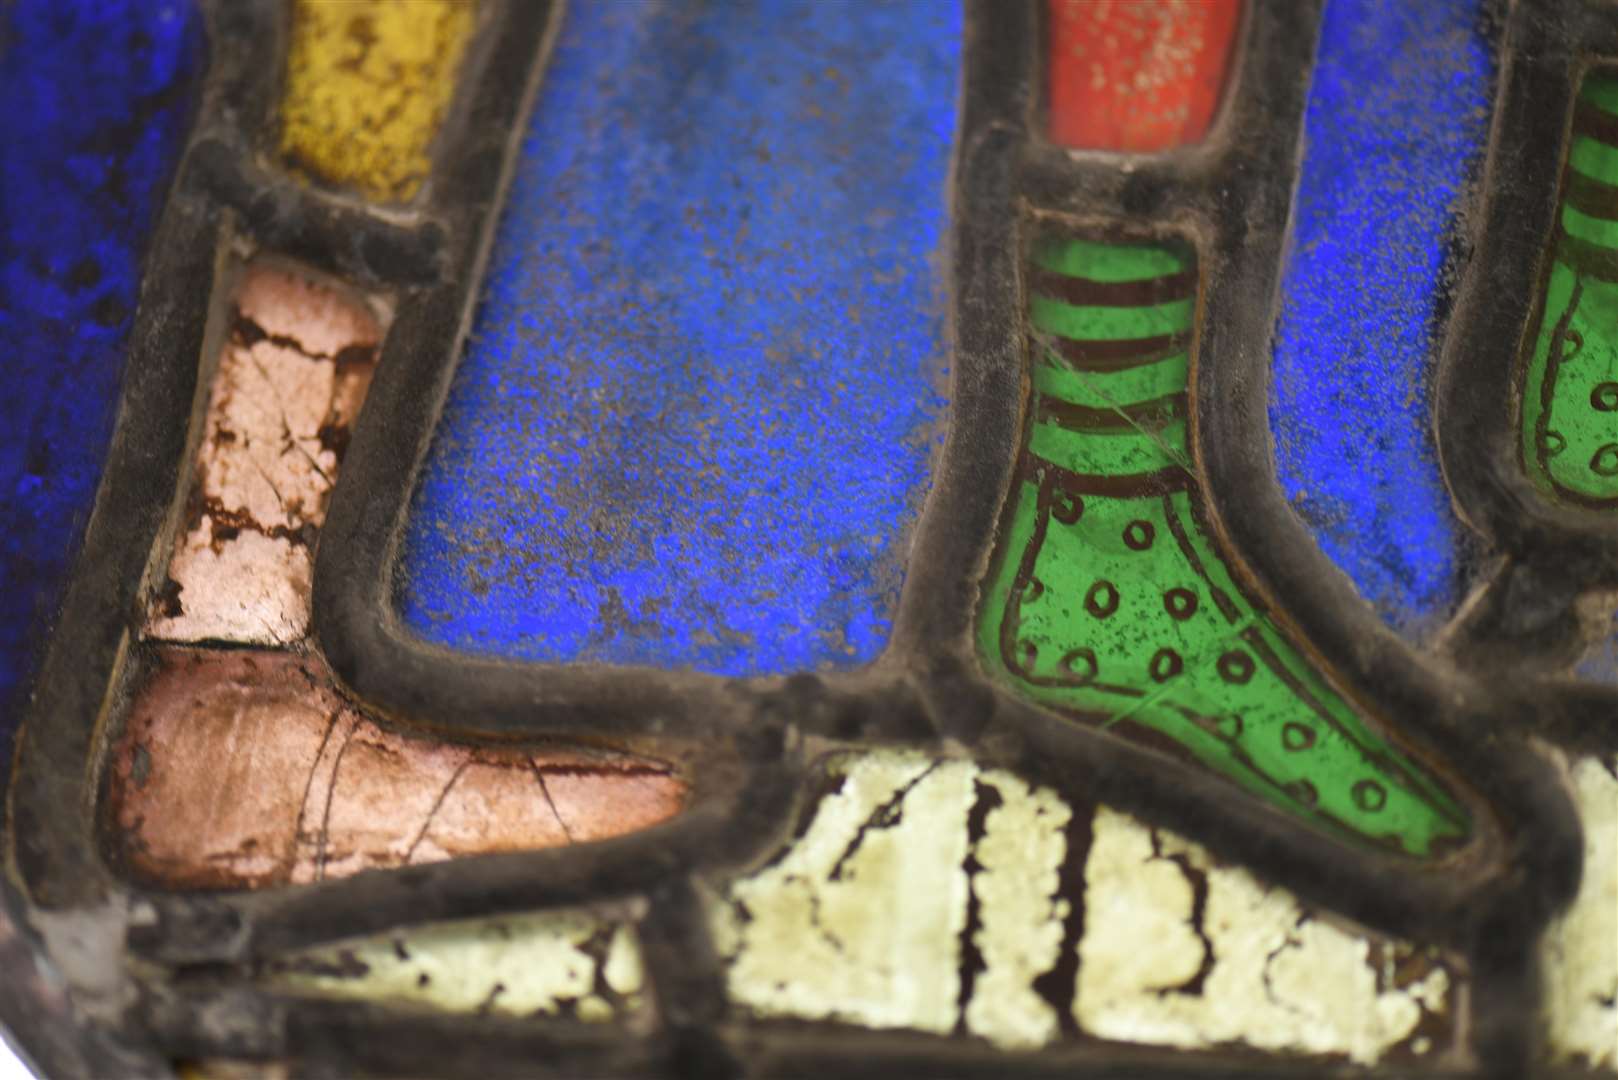 Elaborate footwear is thought to highlight the importance of the pilgrimage